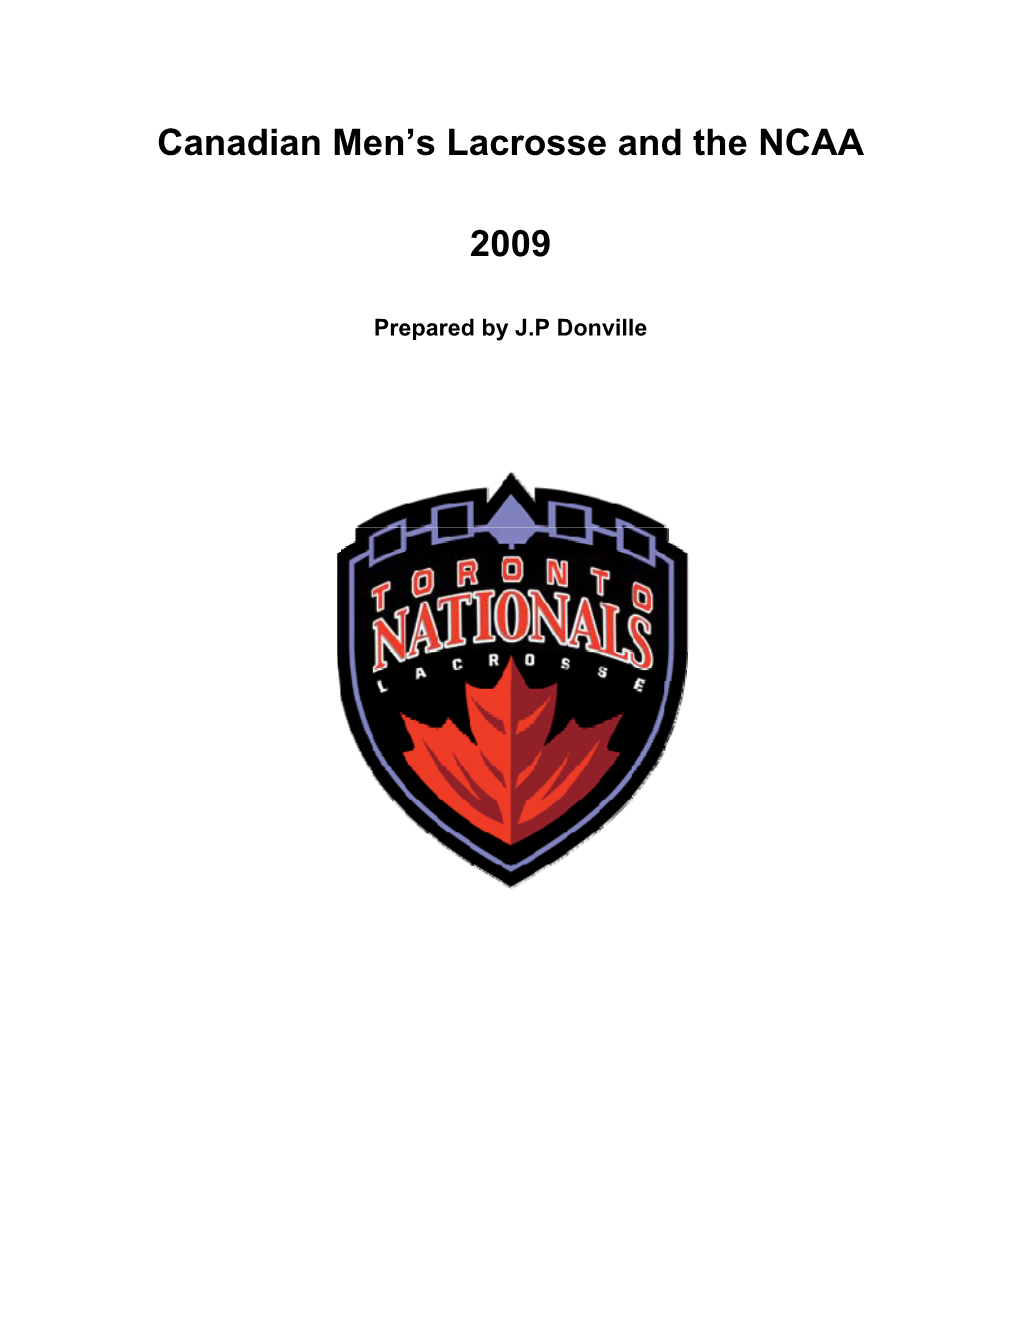 Canadian Men's Lacrosse and the NCAA 2009